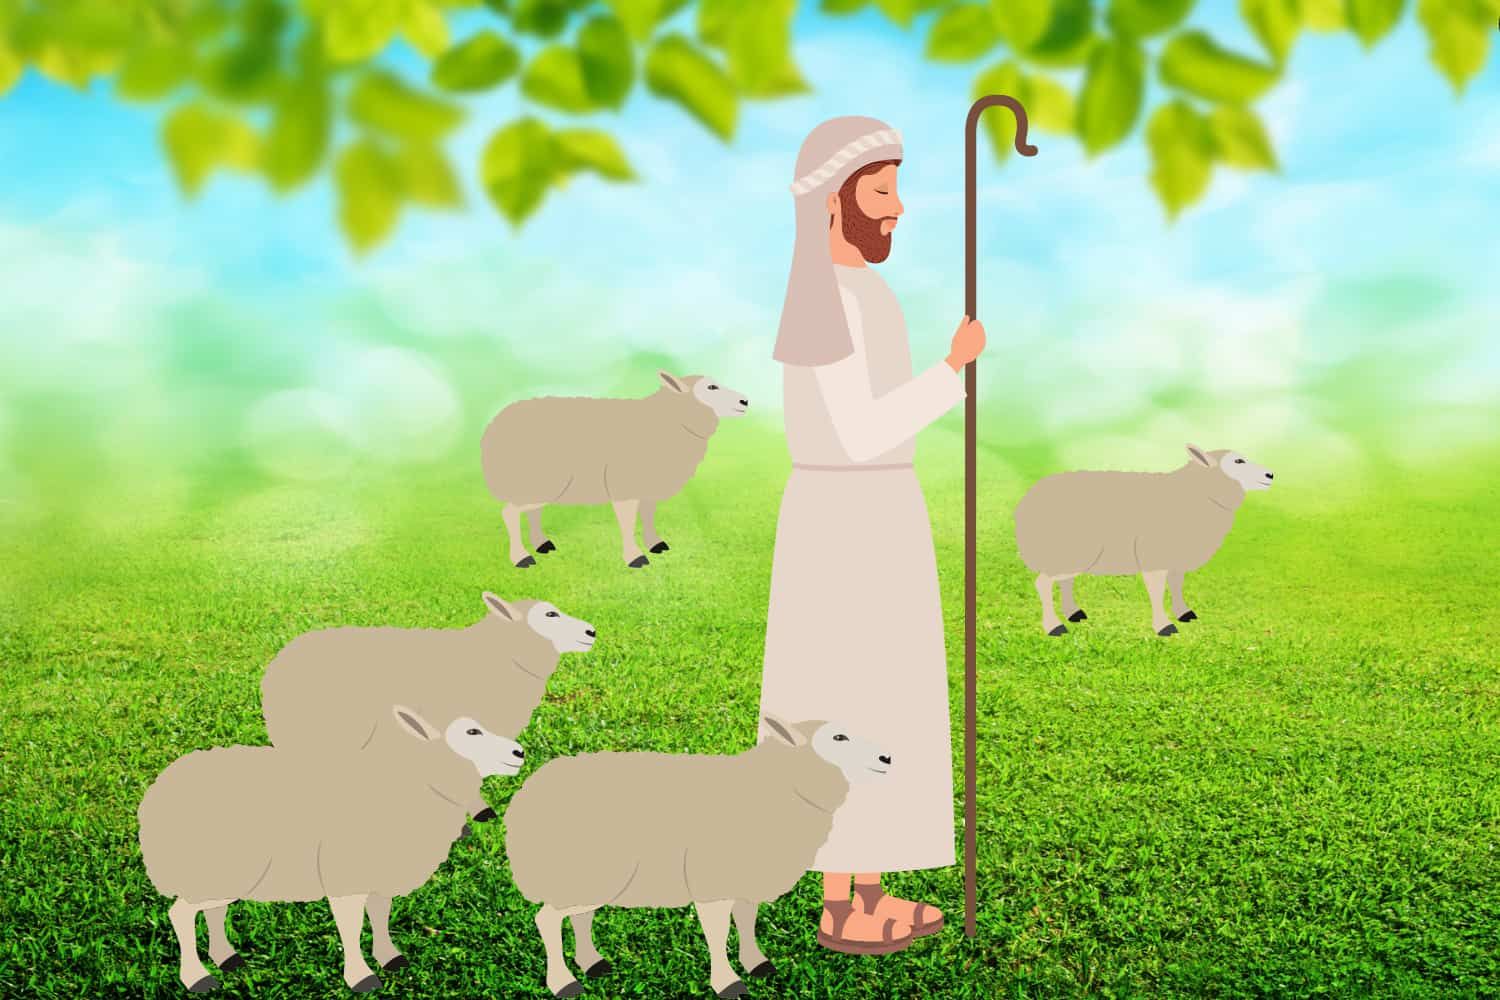 Icebreaker%20-%20NT%20Parable%20of%20the%20lost%20sheep%20-%20Sheep%20sheep%20shepherd-a3e5a649 Jesus - His parables